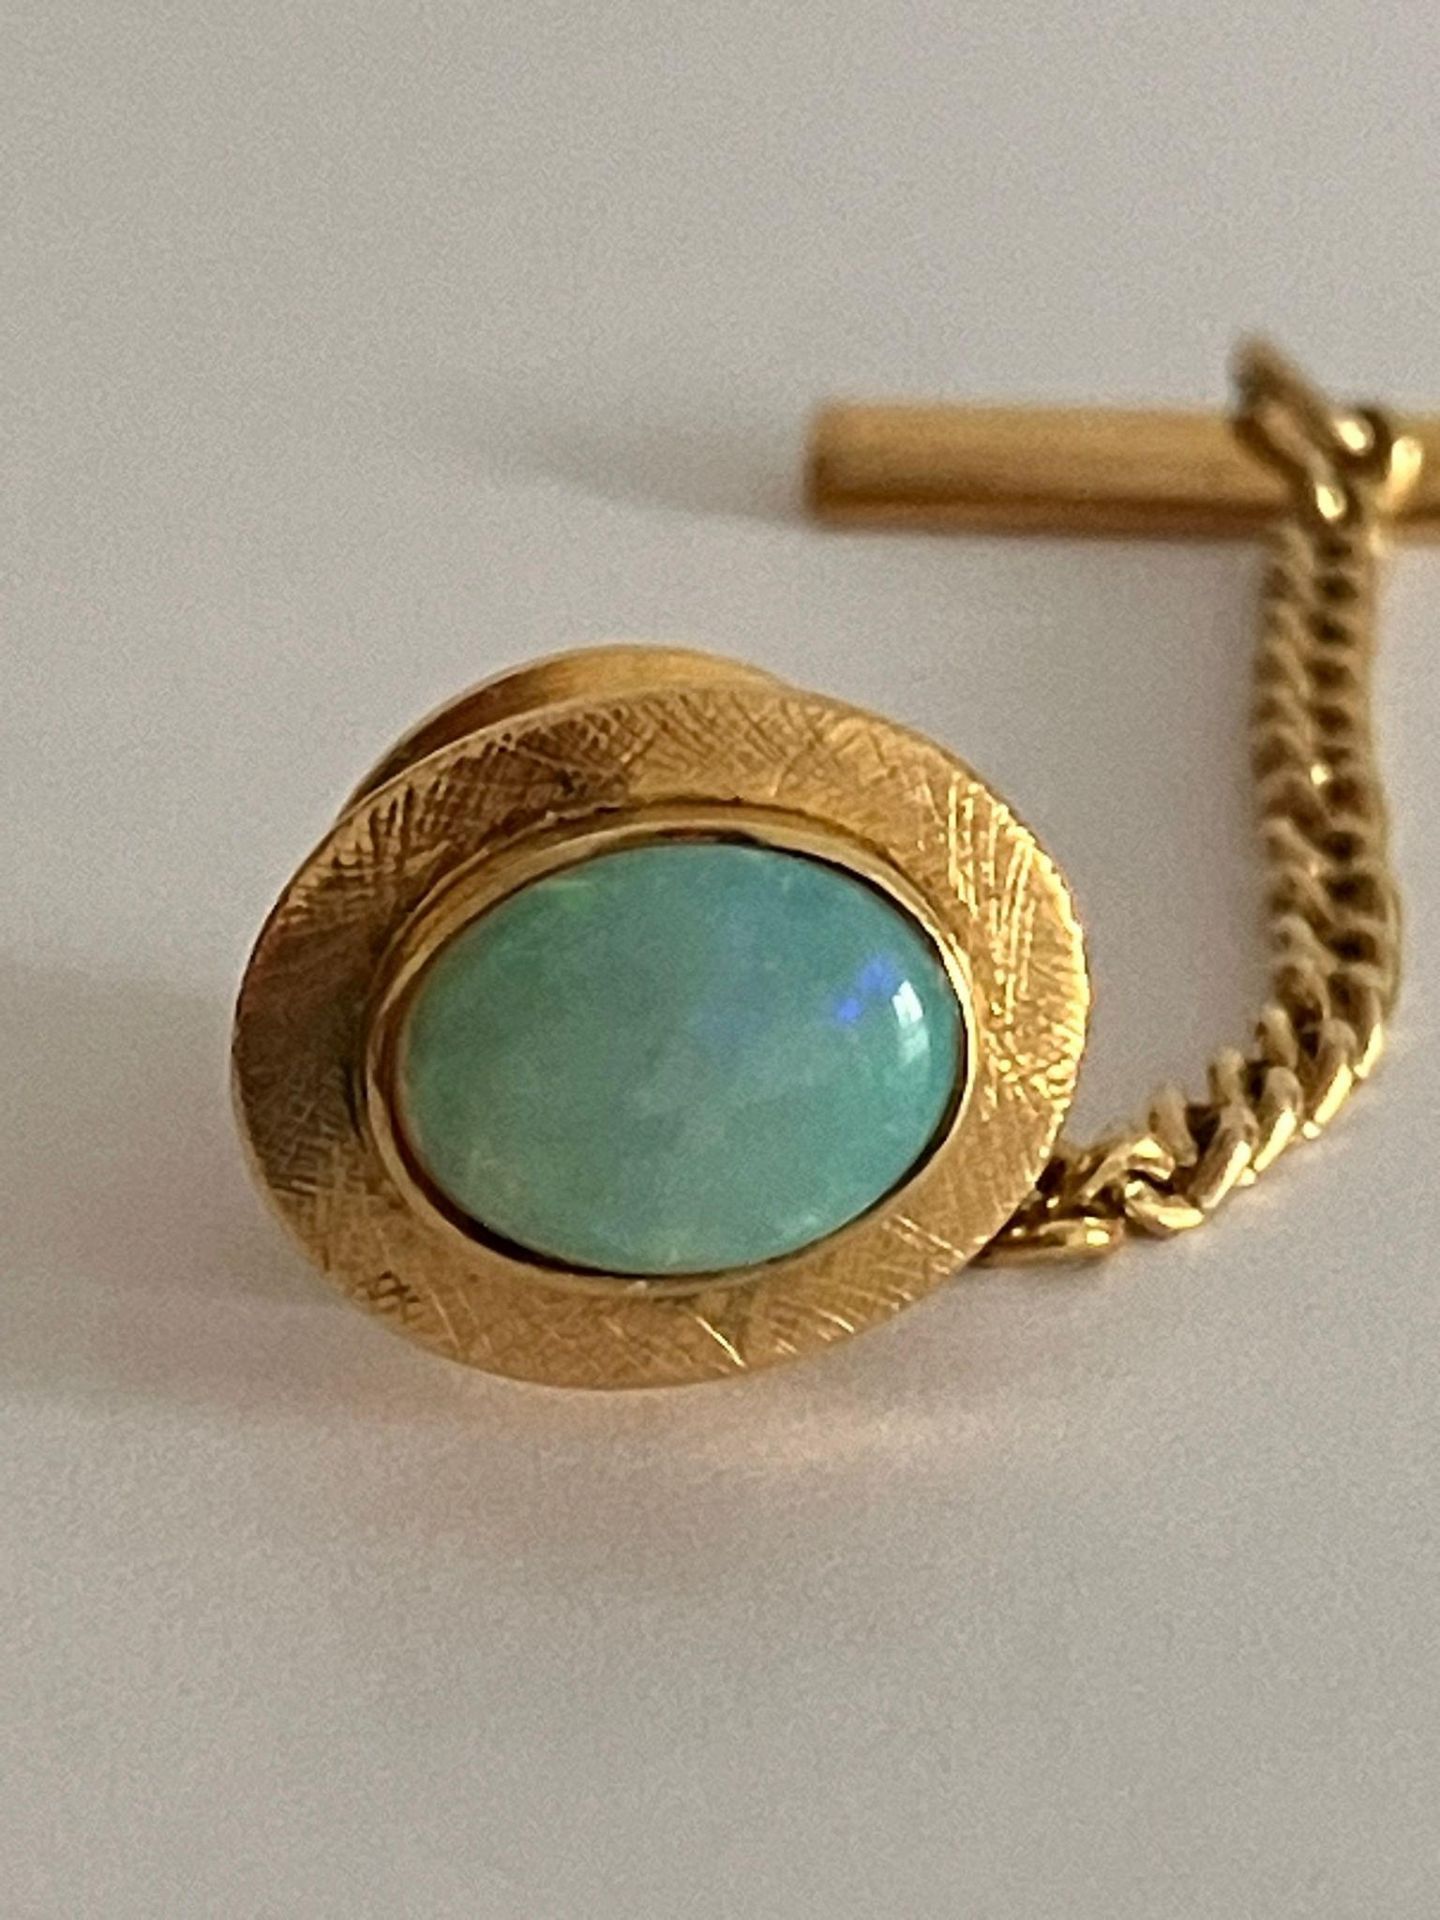 14 carat GOLD TIE PIN set with OPAL. Please note chain is gilt not gold. - Image 3 of 3